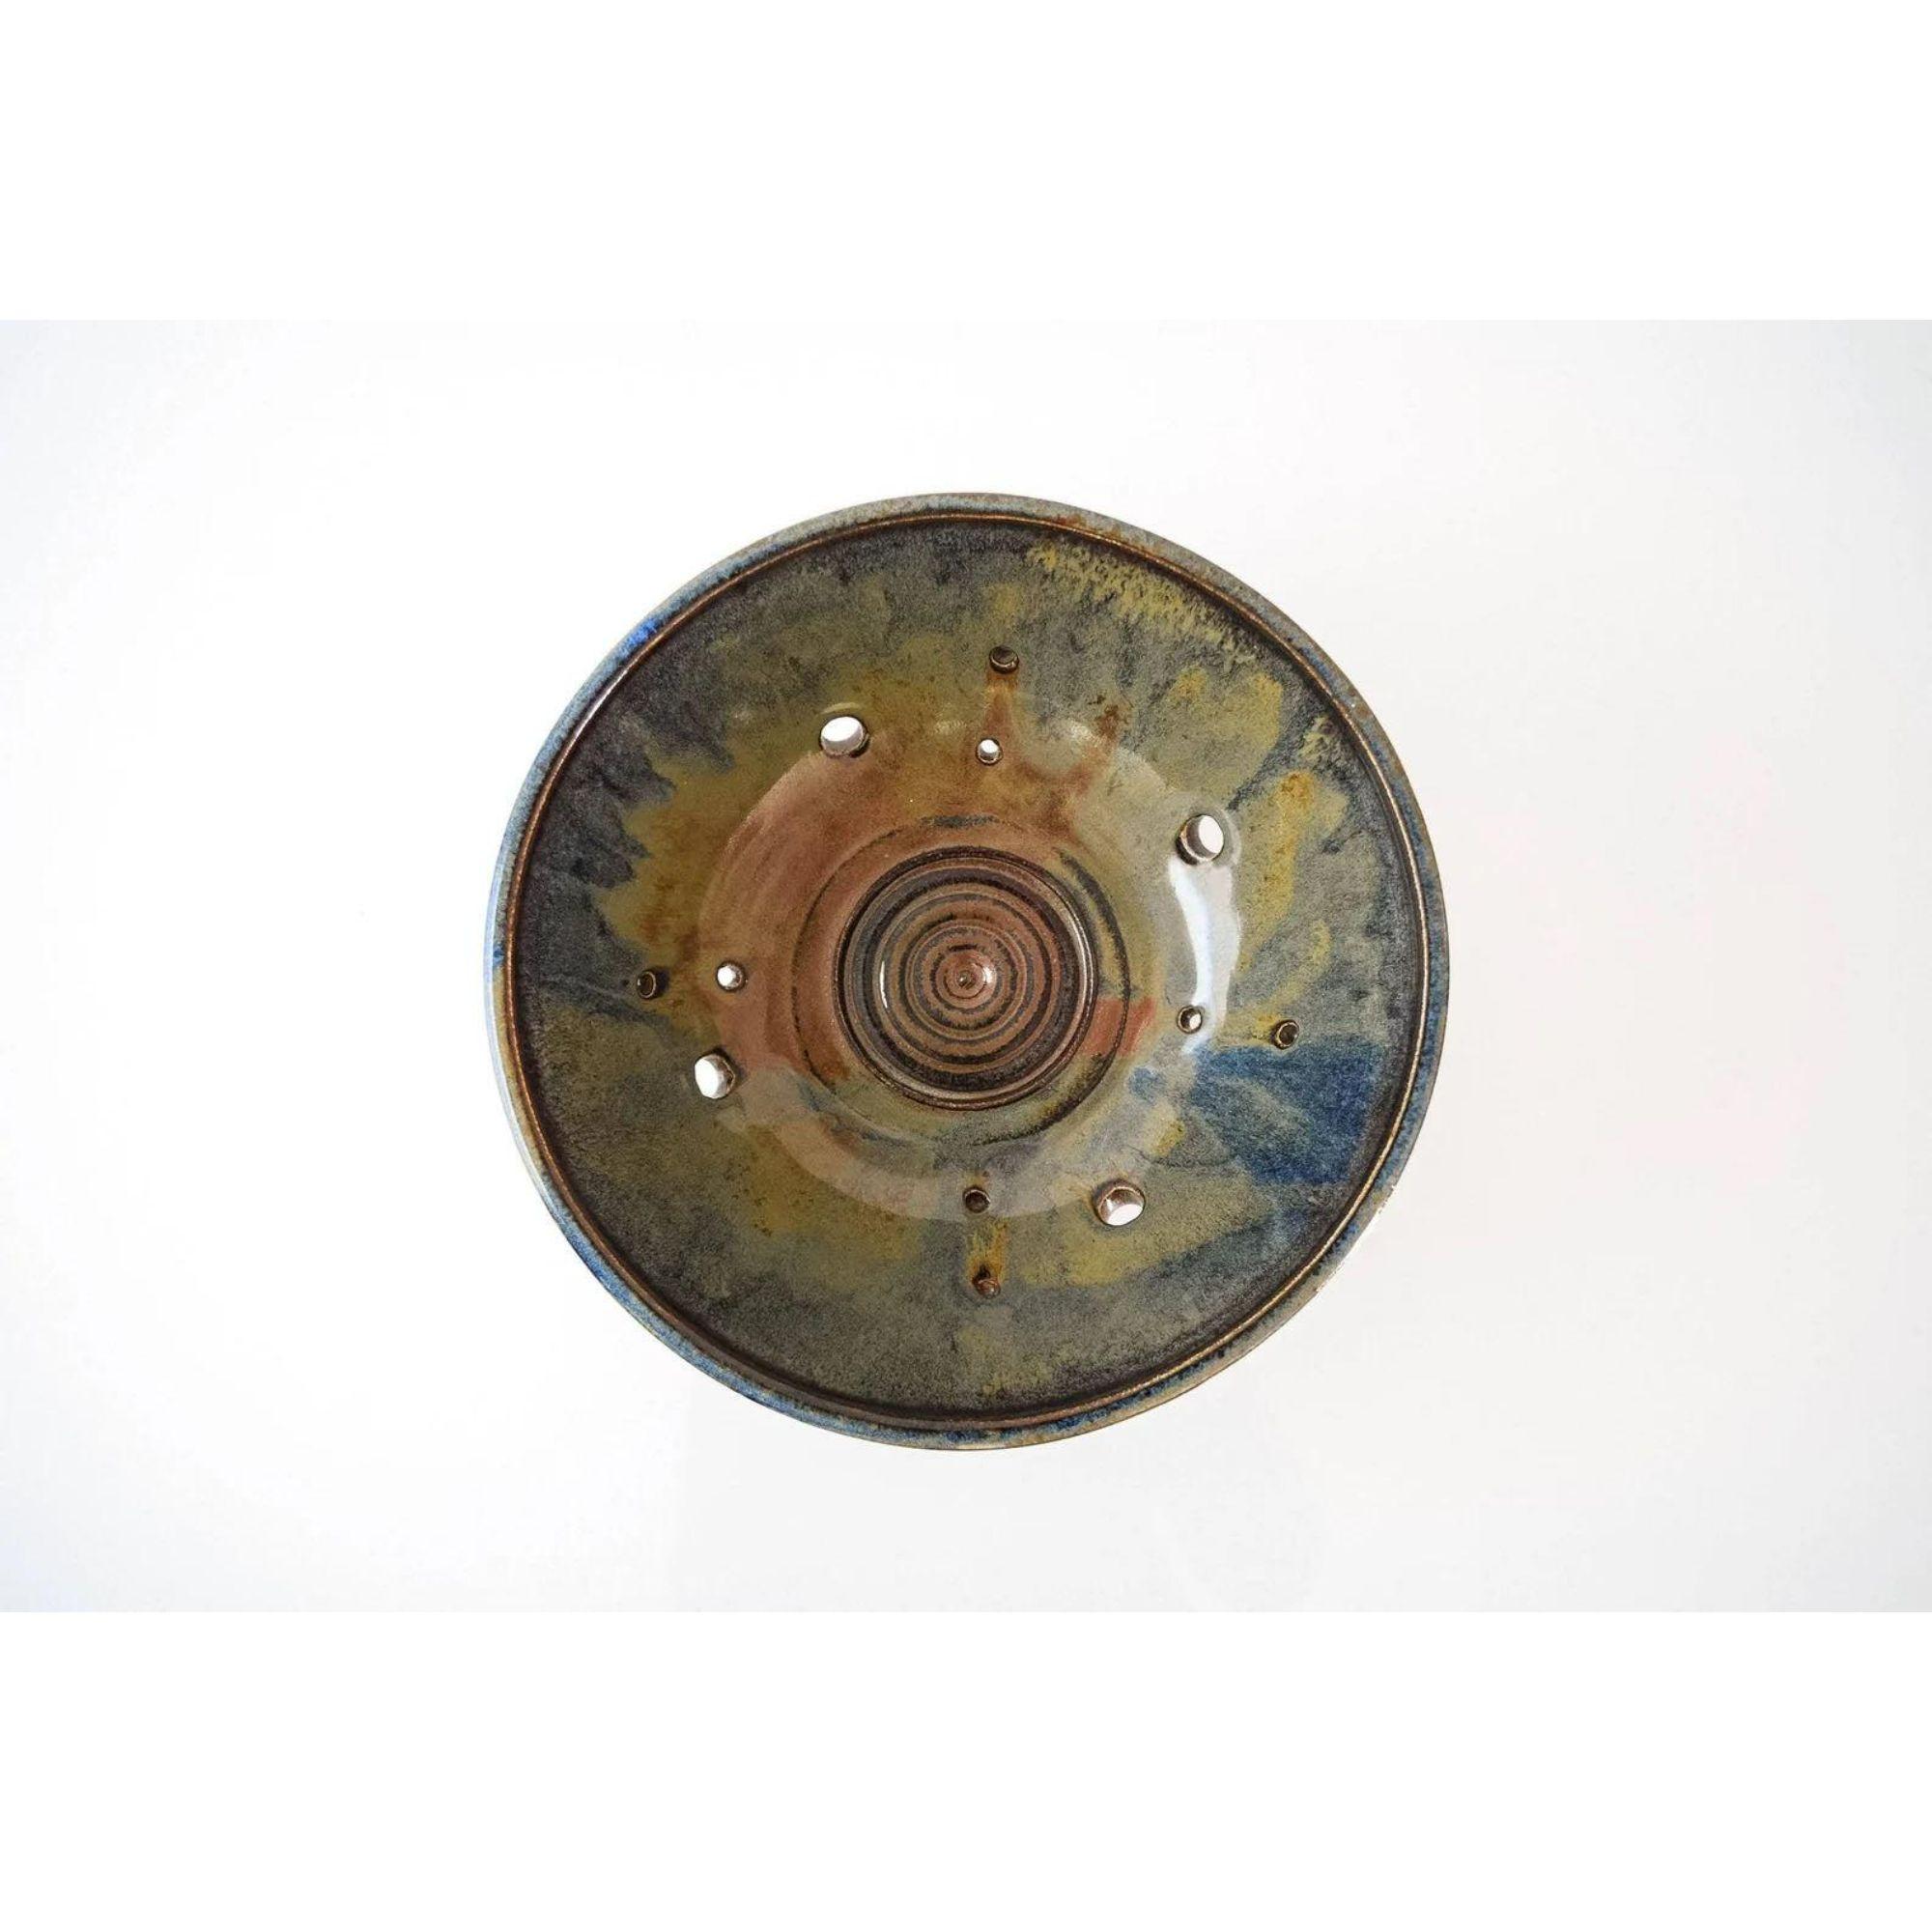 Vintage Mid Century Handcrafted Ceramic Decorative Bowl

This vintage Mid-Century Modern ceramic pottery bowl circa 1960 is beautifully handcrafted. The distinctive modernist design features accent holes, center rings, a pedestal base and gorgeous